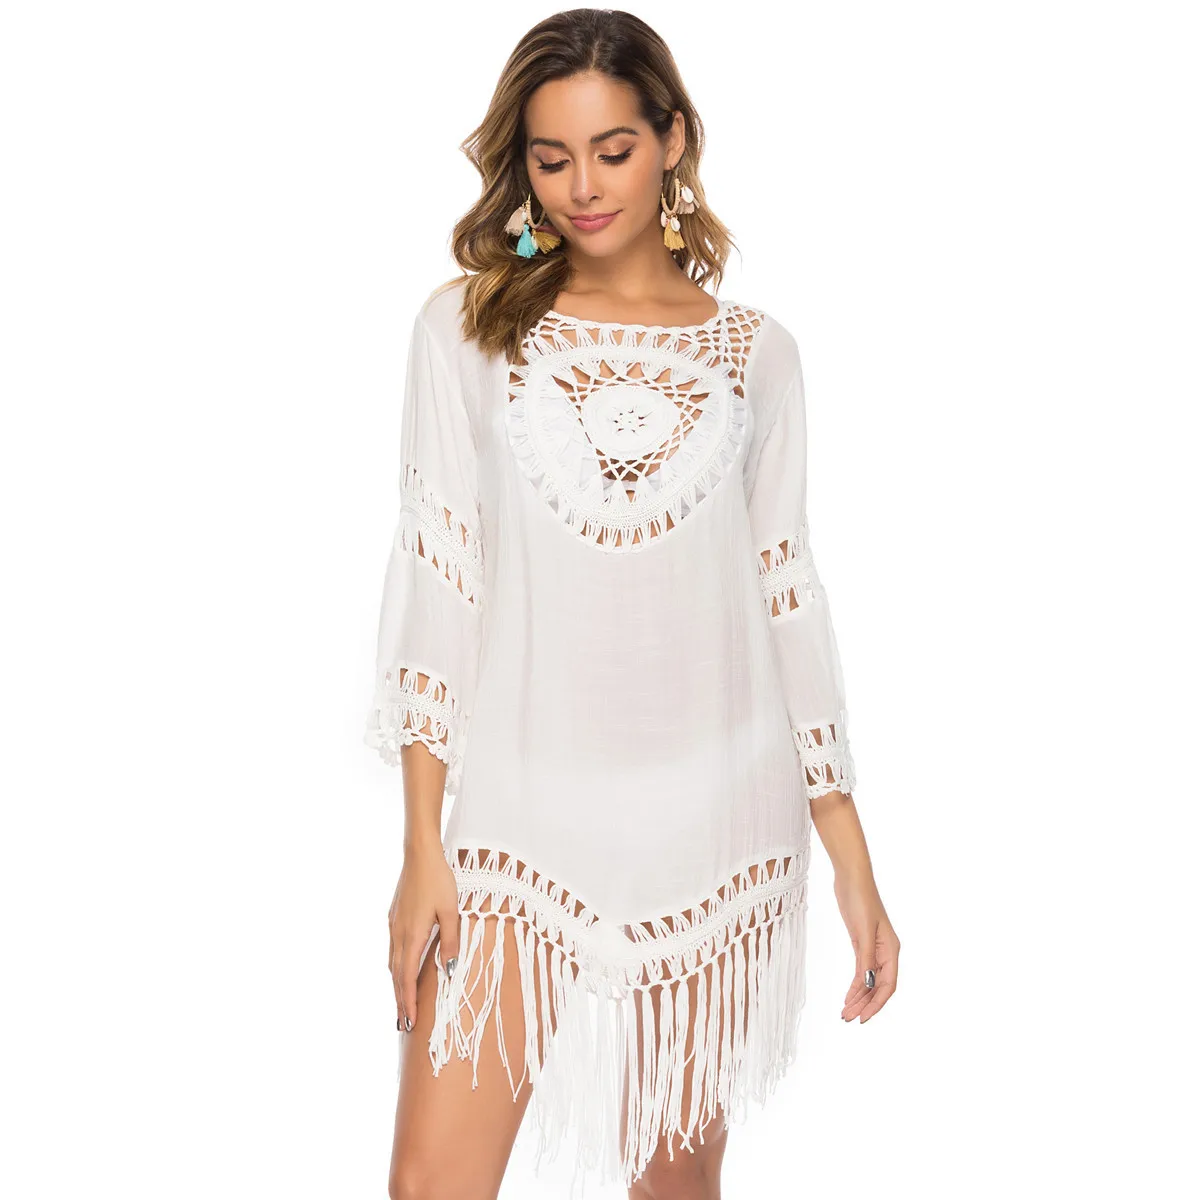 

Women Summer Tassel Lace Hollow Crochet Cover Ups Tunic Swimsuit Beach Dress Tropical Beachwear, Photo showed and customized color